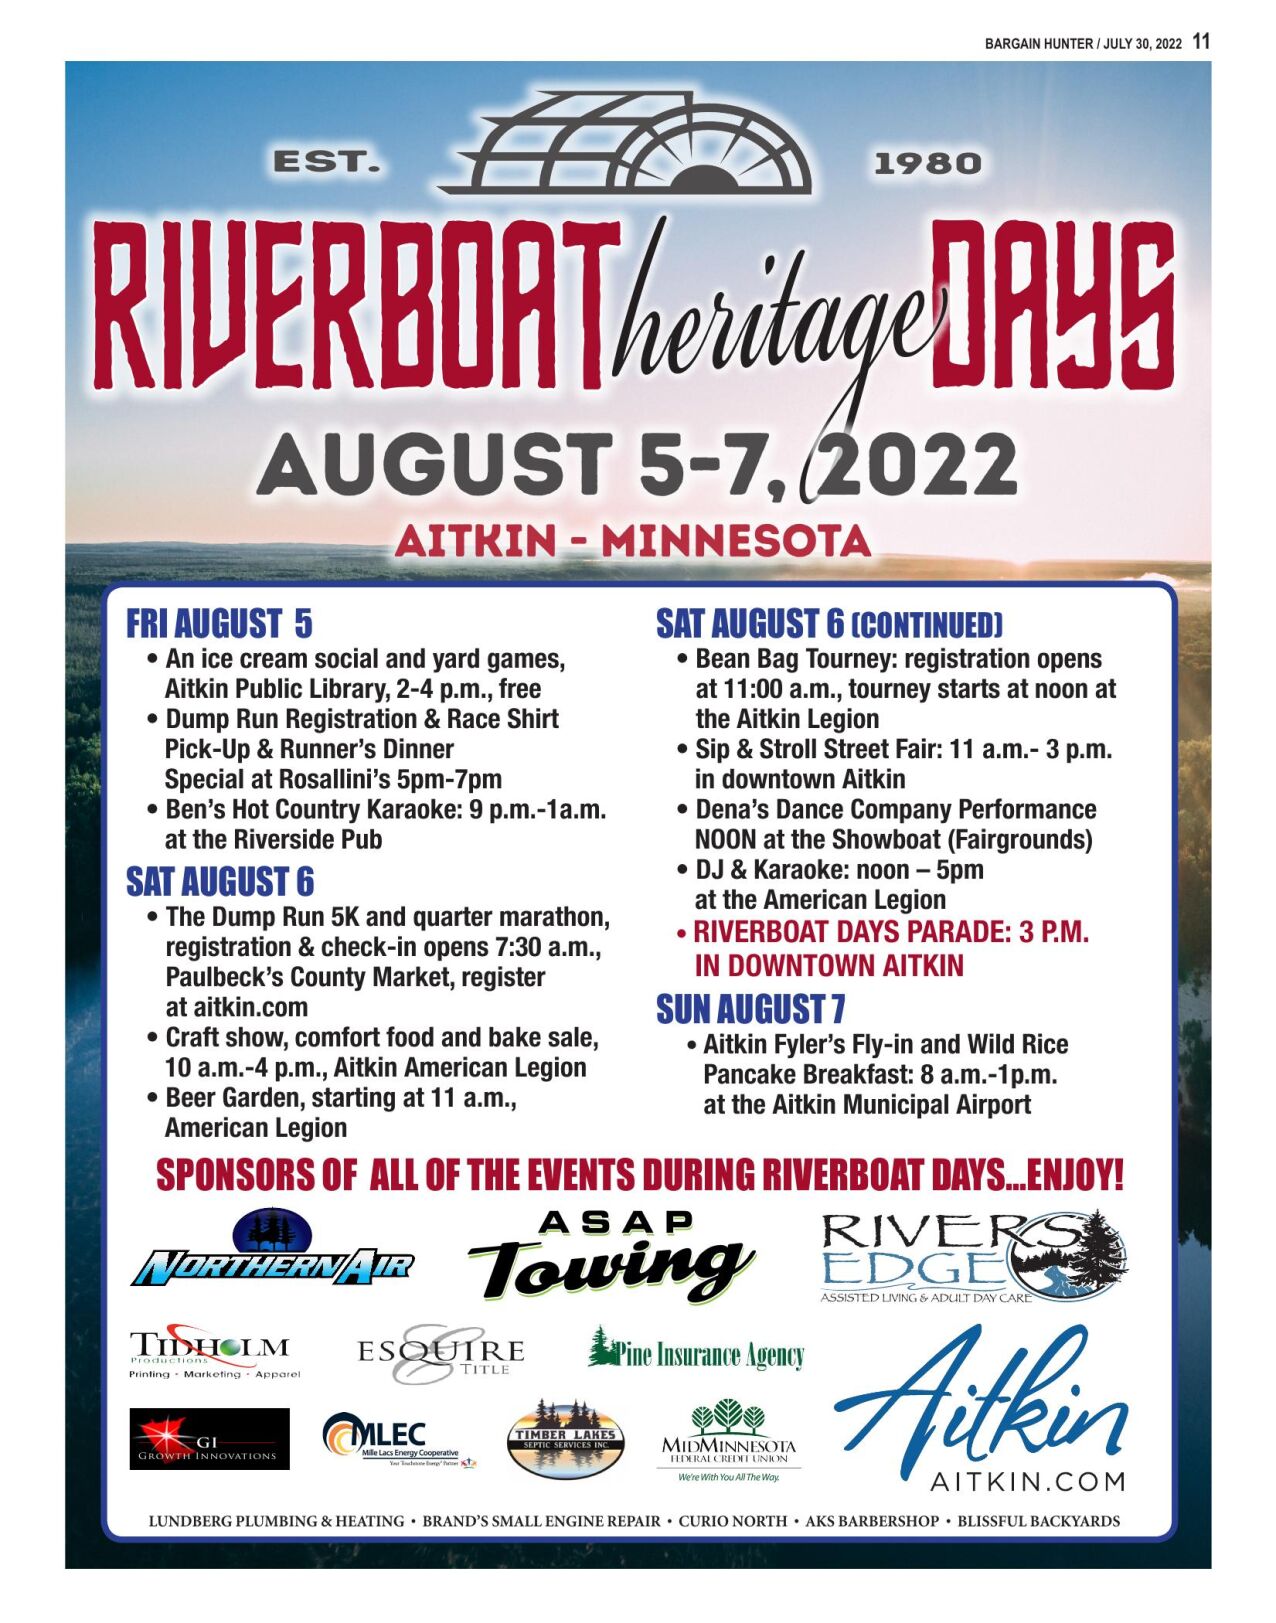 Riverboat Days Schedule 2022